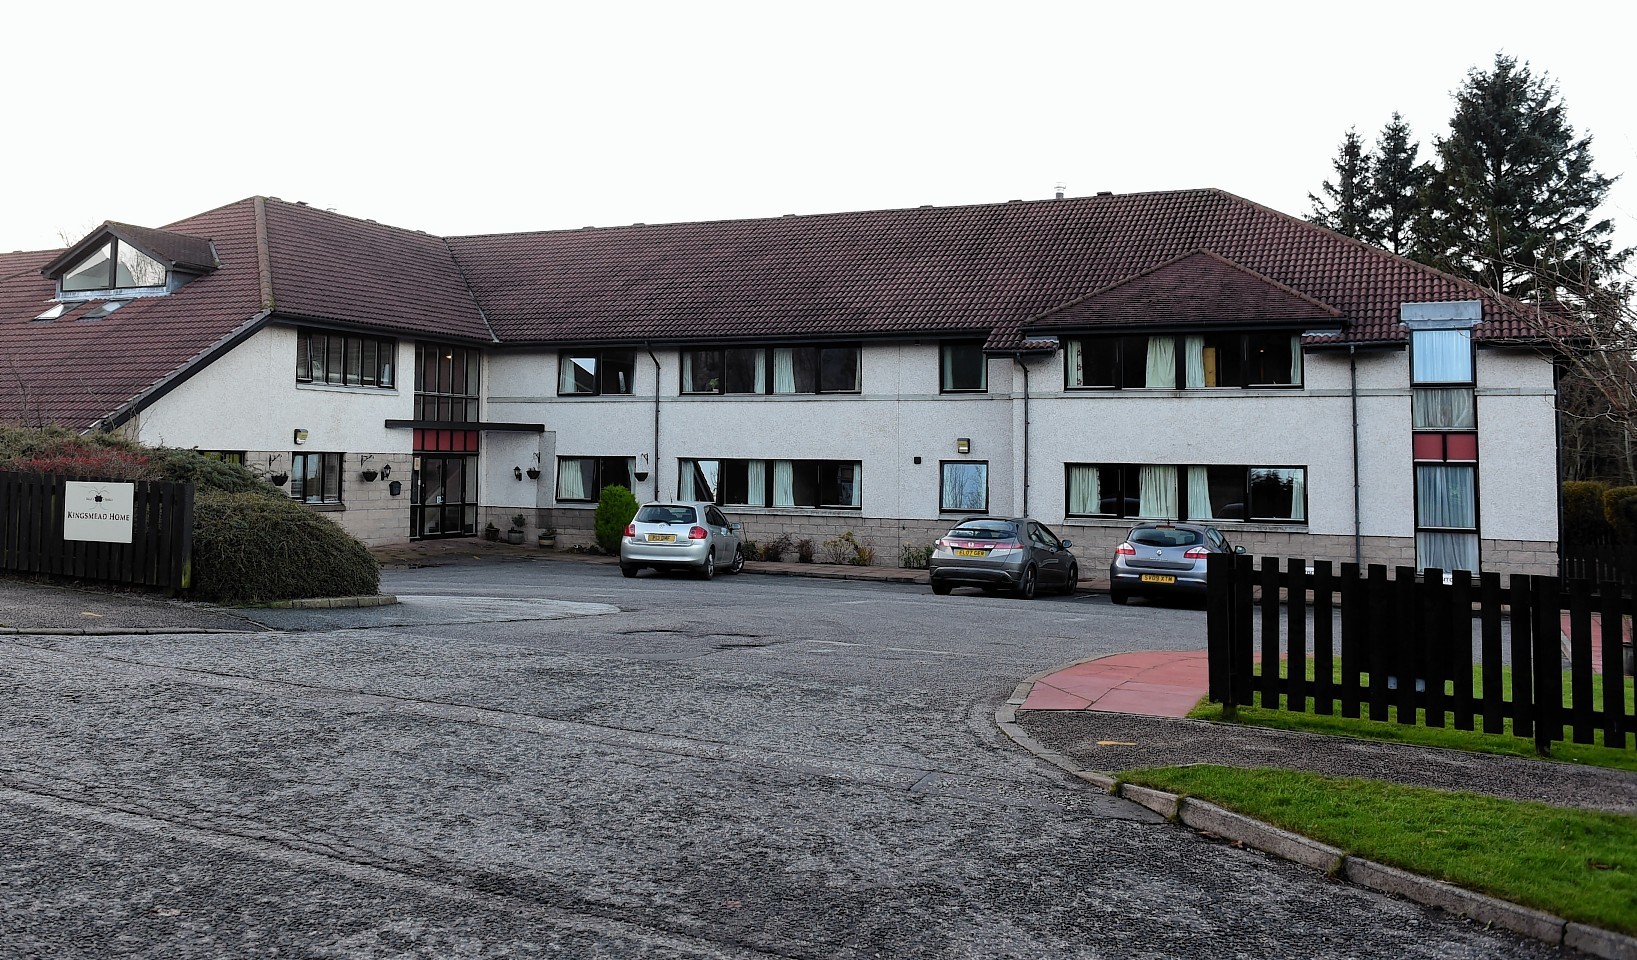 Kingswells Care Home